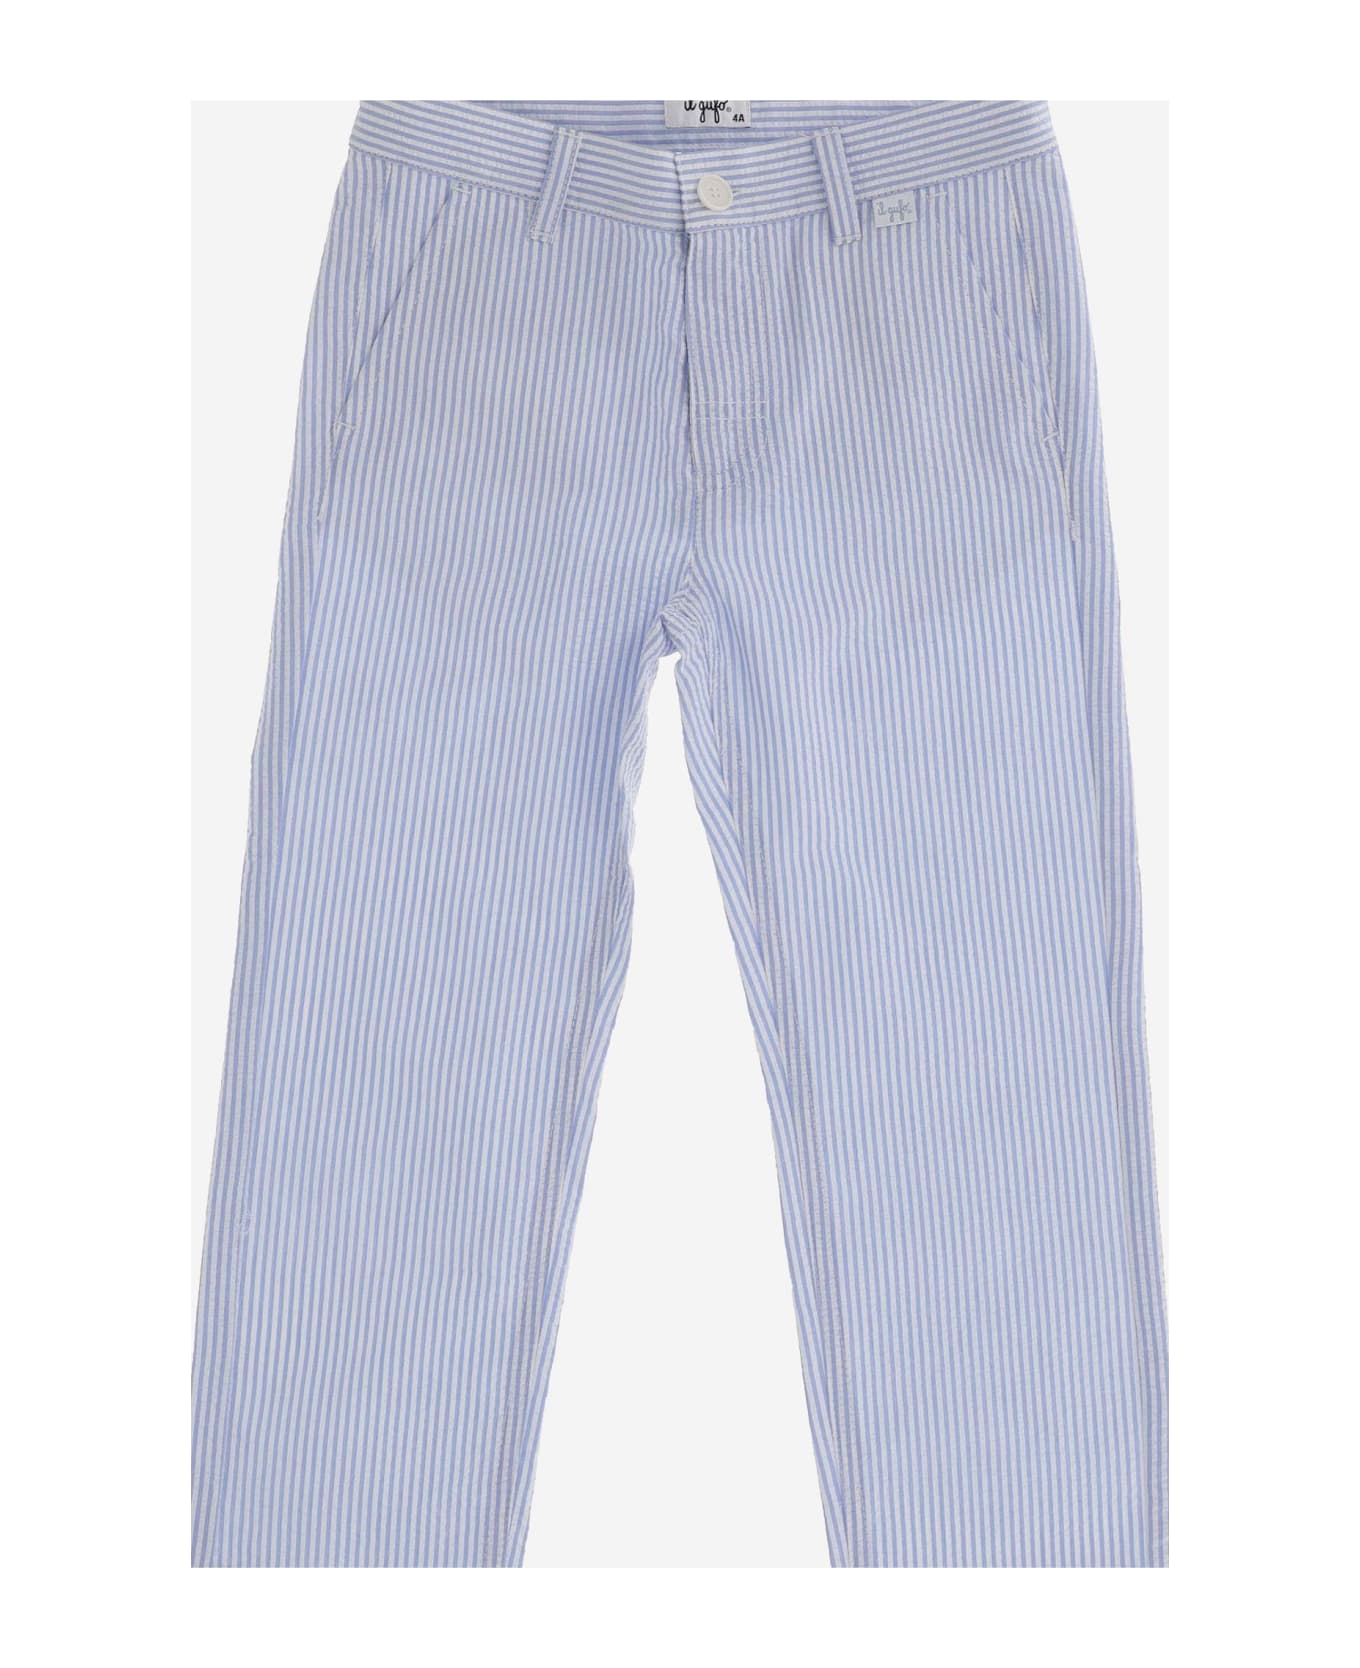 Il Gufo Cotton Pants With Striped Pattern - Clear Blue